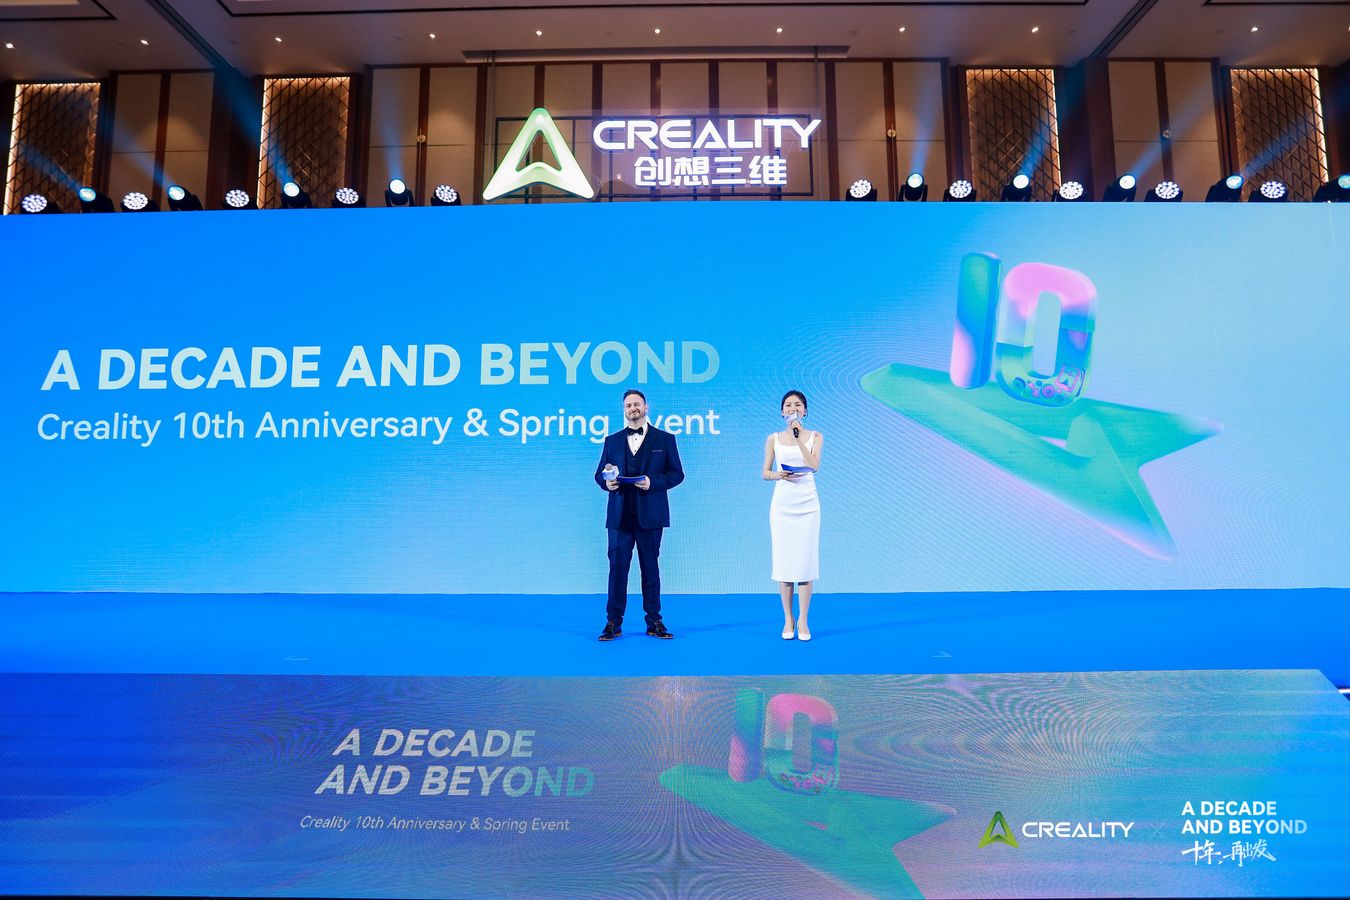 Crelity 10 year aniversarry2 result | “A Decade and Beyond”: Creality’s 10 Years of Innovation and Community Engagement